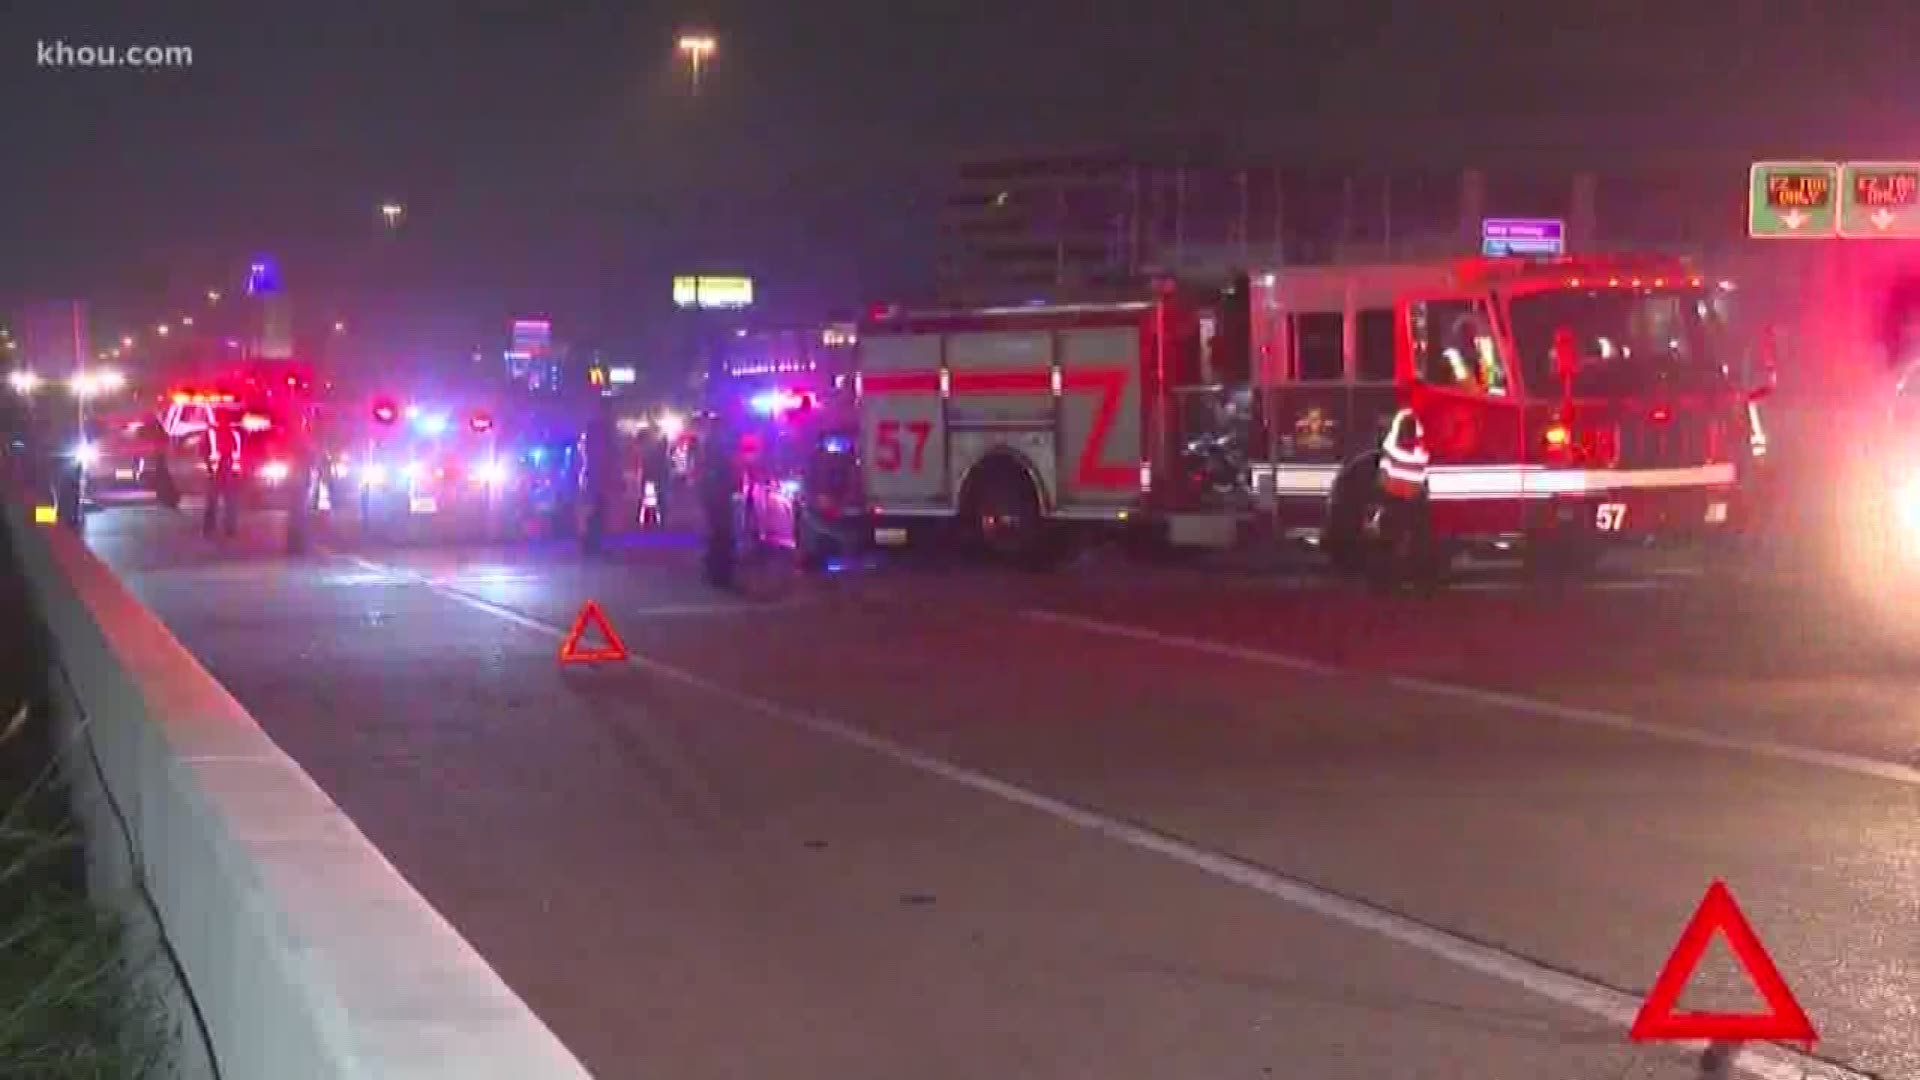 Police say two drivers are facing charges after crashes on I-10 the Katy Freeway overnight. One driver hit a big rig. The other hit a responding fire truck.